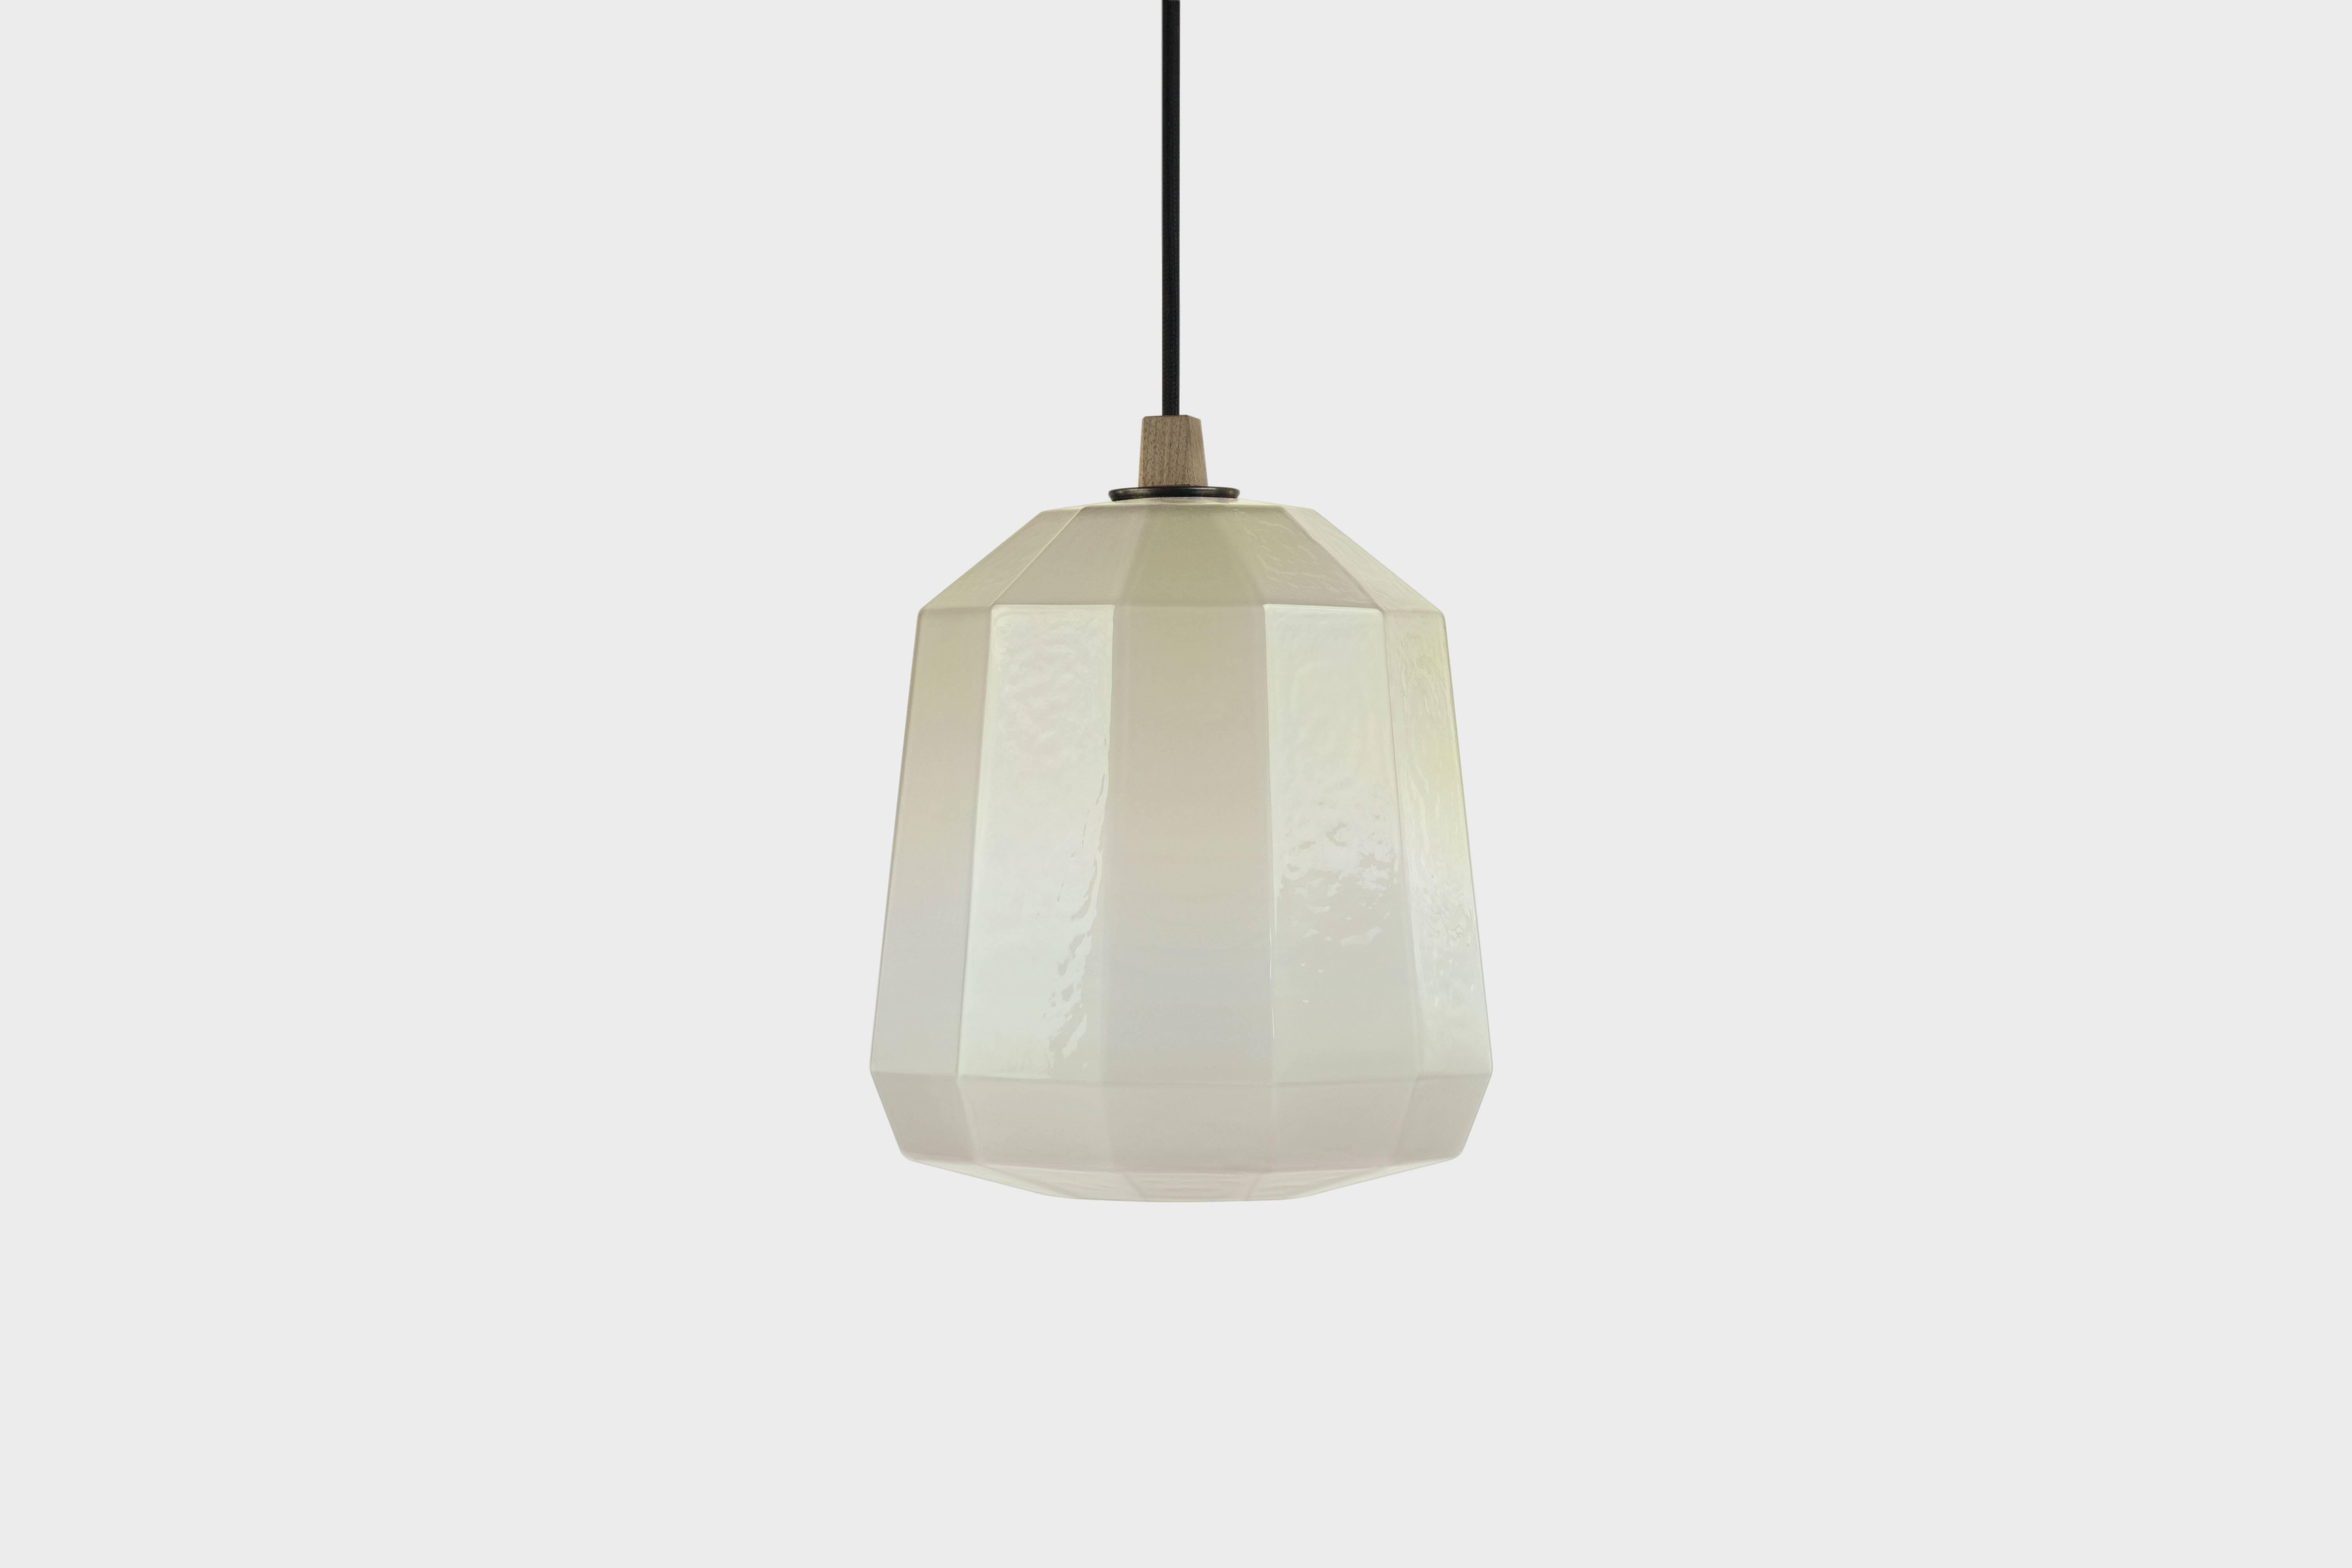 BIRDY - 12.5”H x 9.5”L x 9.5”W Available in 7 colors

The Poly Pop Pendant Collection gives geometrically ridged architectural structure to common organic forms. Drawing inspiration from Art Deco and early Modernist lighting and decorative glassware